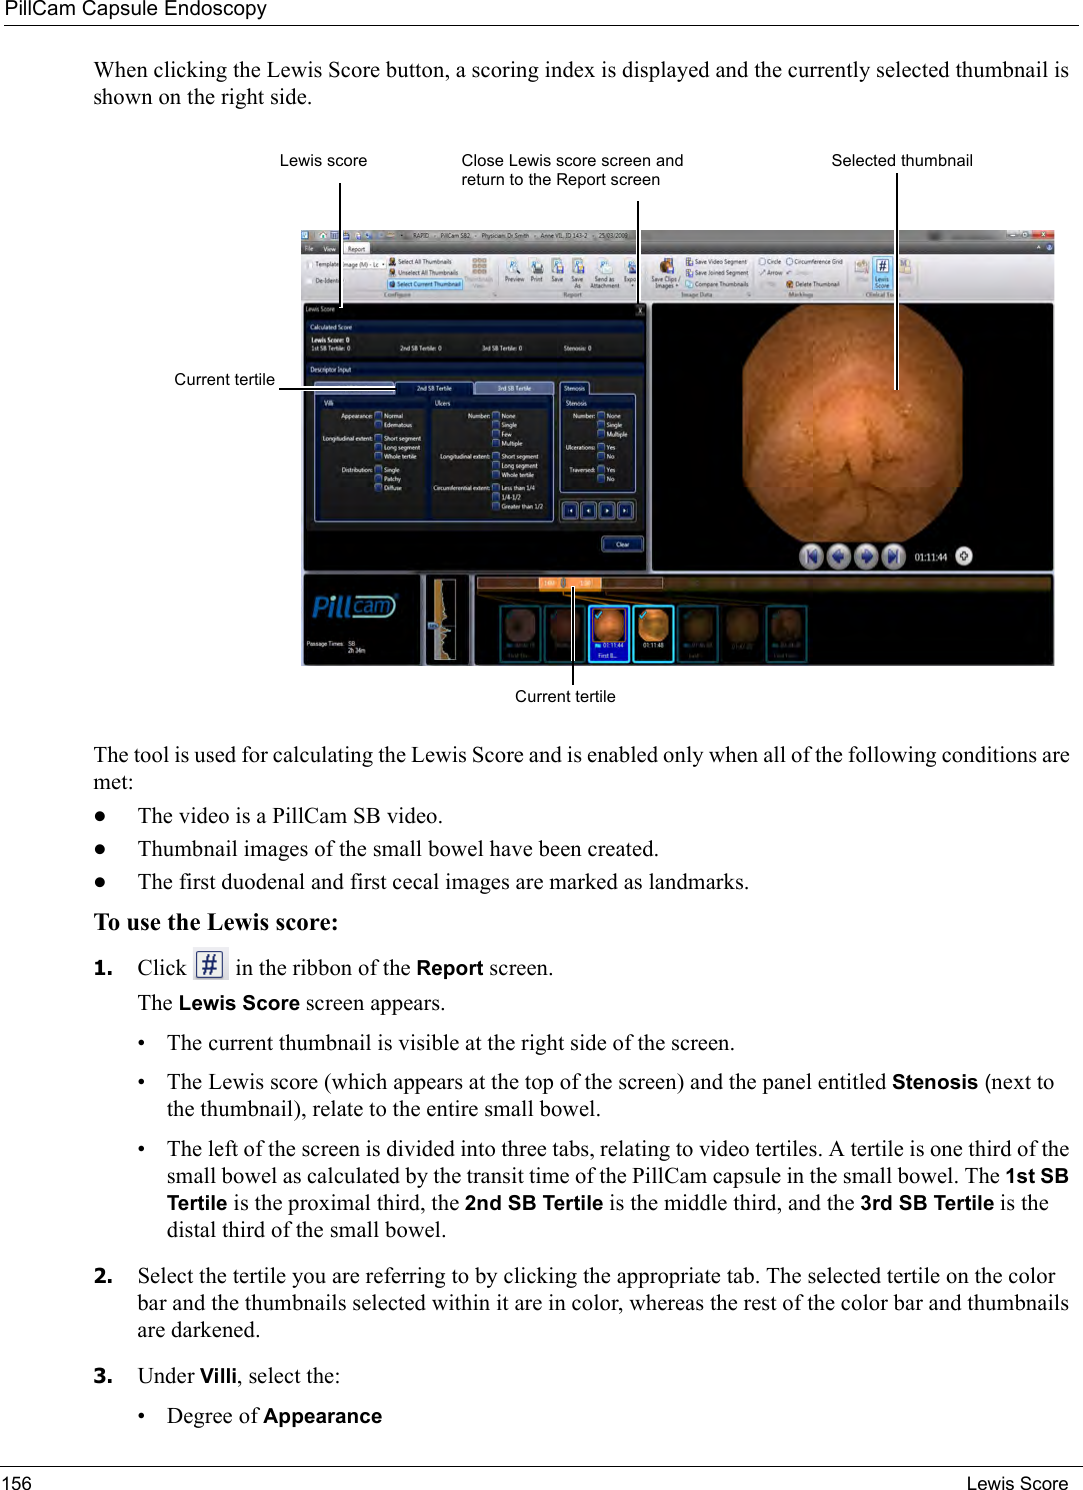 PillCam Capsule Endoscopy156 Lewis ScoreWhen clicking the Lewis Score button, a scoring index is displayed and the currently selected thumbnail is shown on the right side. The tool is used for calculating the Lewis Score and is enabled only when all of the following conditions are met: •The video is a PillCam SB video.•Thumbnail images of the small bowel have been created.•The first duodenal and first cecal images are marked as landmarks.To use the Lewis score:1. Click   in the ribbon of the Report screen.The Lewis Score screen appears.• The current thumbnail is visible at the right side of the screen.• The Lewis score (which appears at the top of the screen) and the panel entitled Stenosis (next to the thumbnail), relate to the entire small bowel.• The left of the screen is divided into three tabs, relating to video tertiles. A tertile is one third of the small bowel as calculated by the transit time of the PillCam capsule in the small bowel. The 1st SB Tertile is the proximal third, the 2nd SB Tertile is the middle third, and the 3rd SB Tertile is the distal third of the small bowel.2. Select the tertile you are referring to by clicking the appropriate tab. The selected tertile on the color bar and the thumbnails selected within it are in color, whereas the rest of the color bar and thumbnails are darkened.3. Under Villi, select the:• Degree of AppearanceLewis score Selected thumbnailClose Lewis score screen and return to the Report screenCurrent tertileCurrent tertile